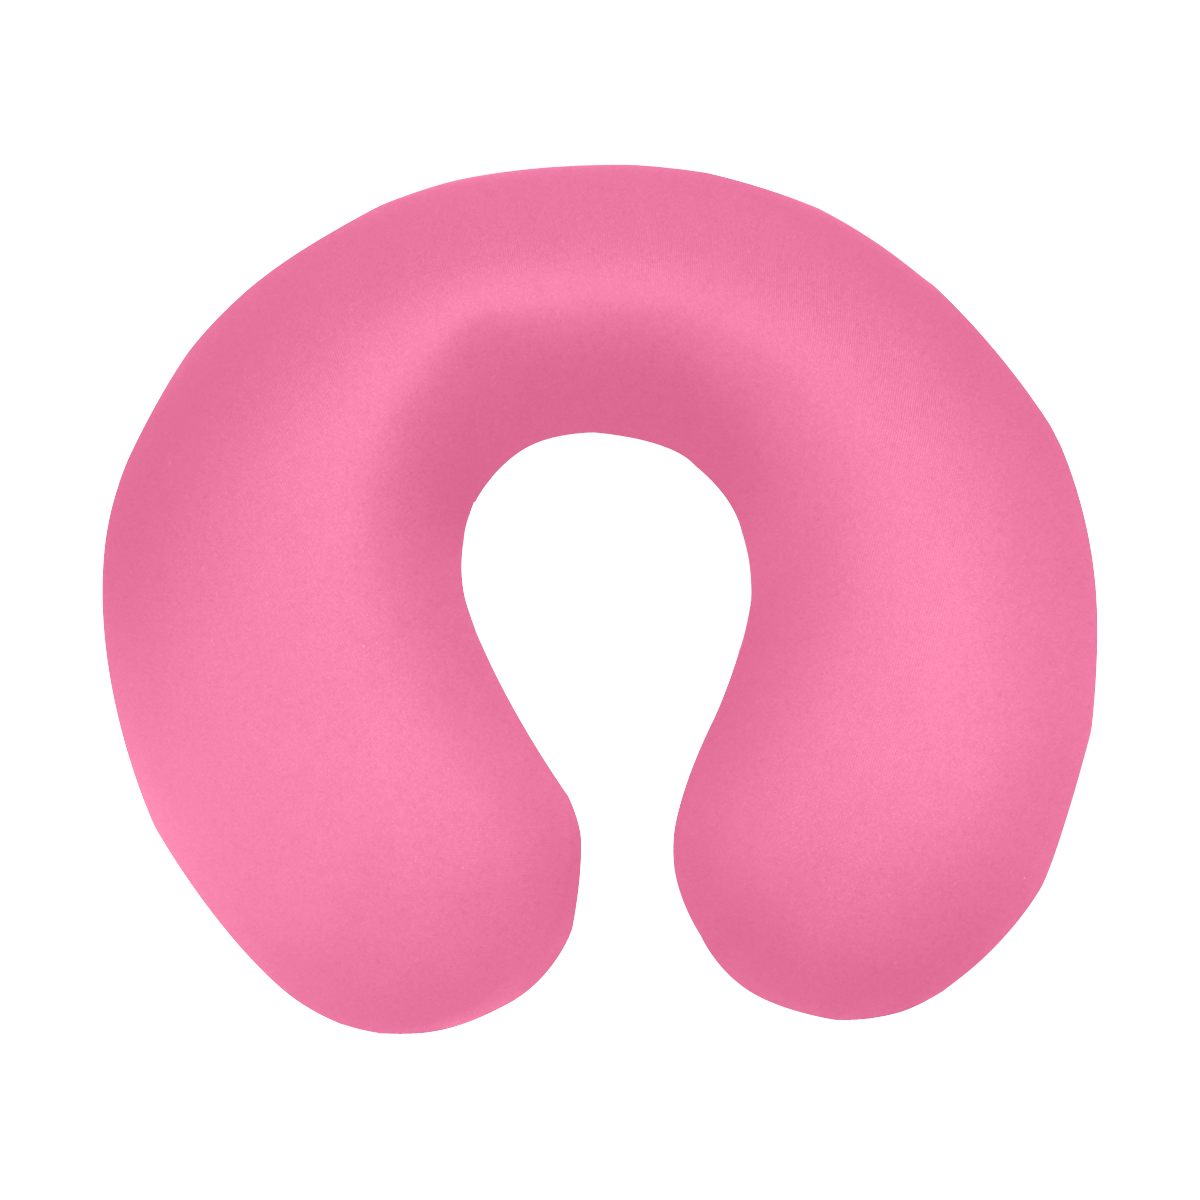 color French pink U-Shape Travel Pillow